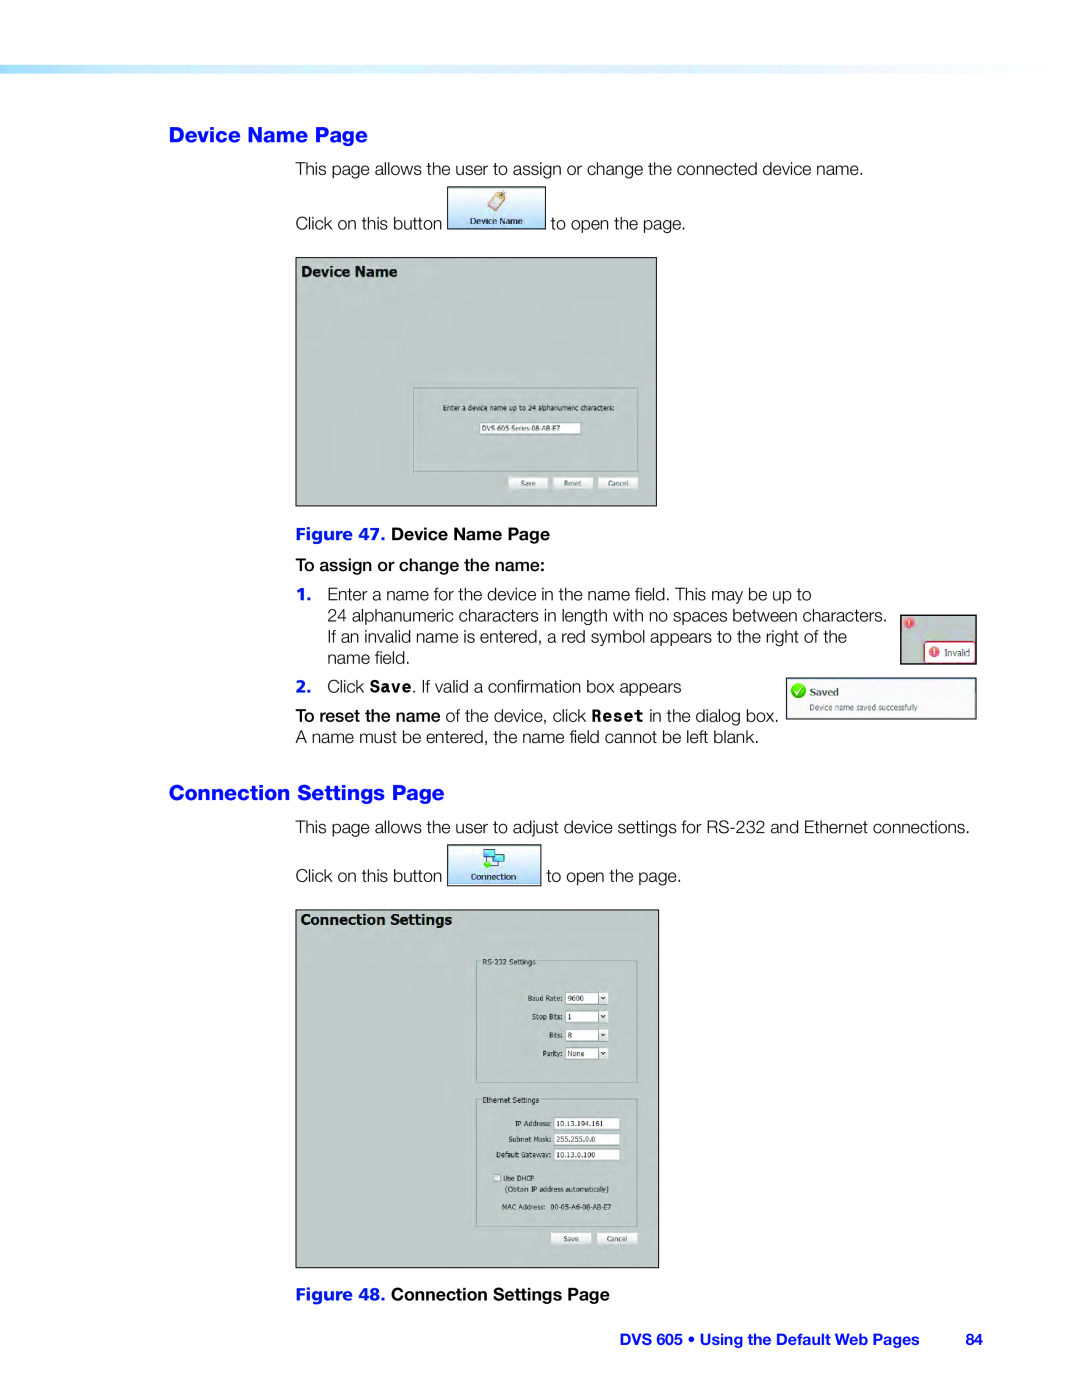 Extron electronic DVS 605 manual Device Name Page, Connection Settings Page 